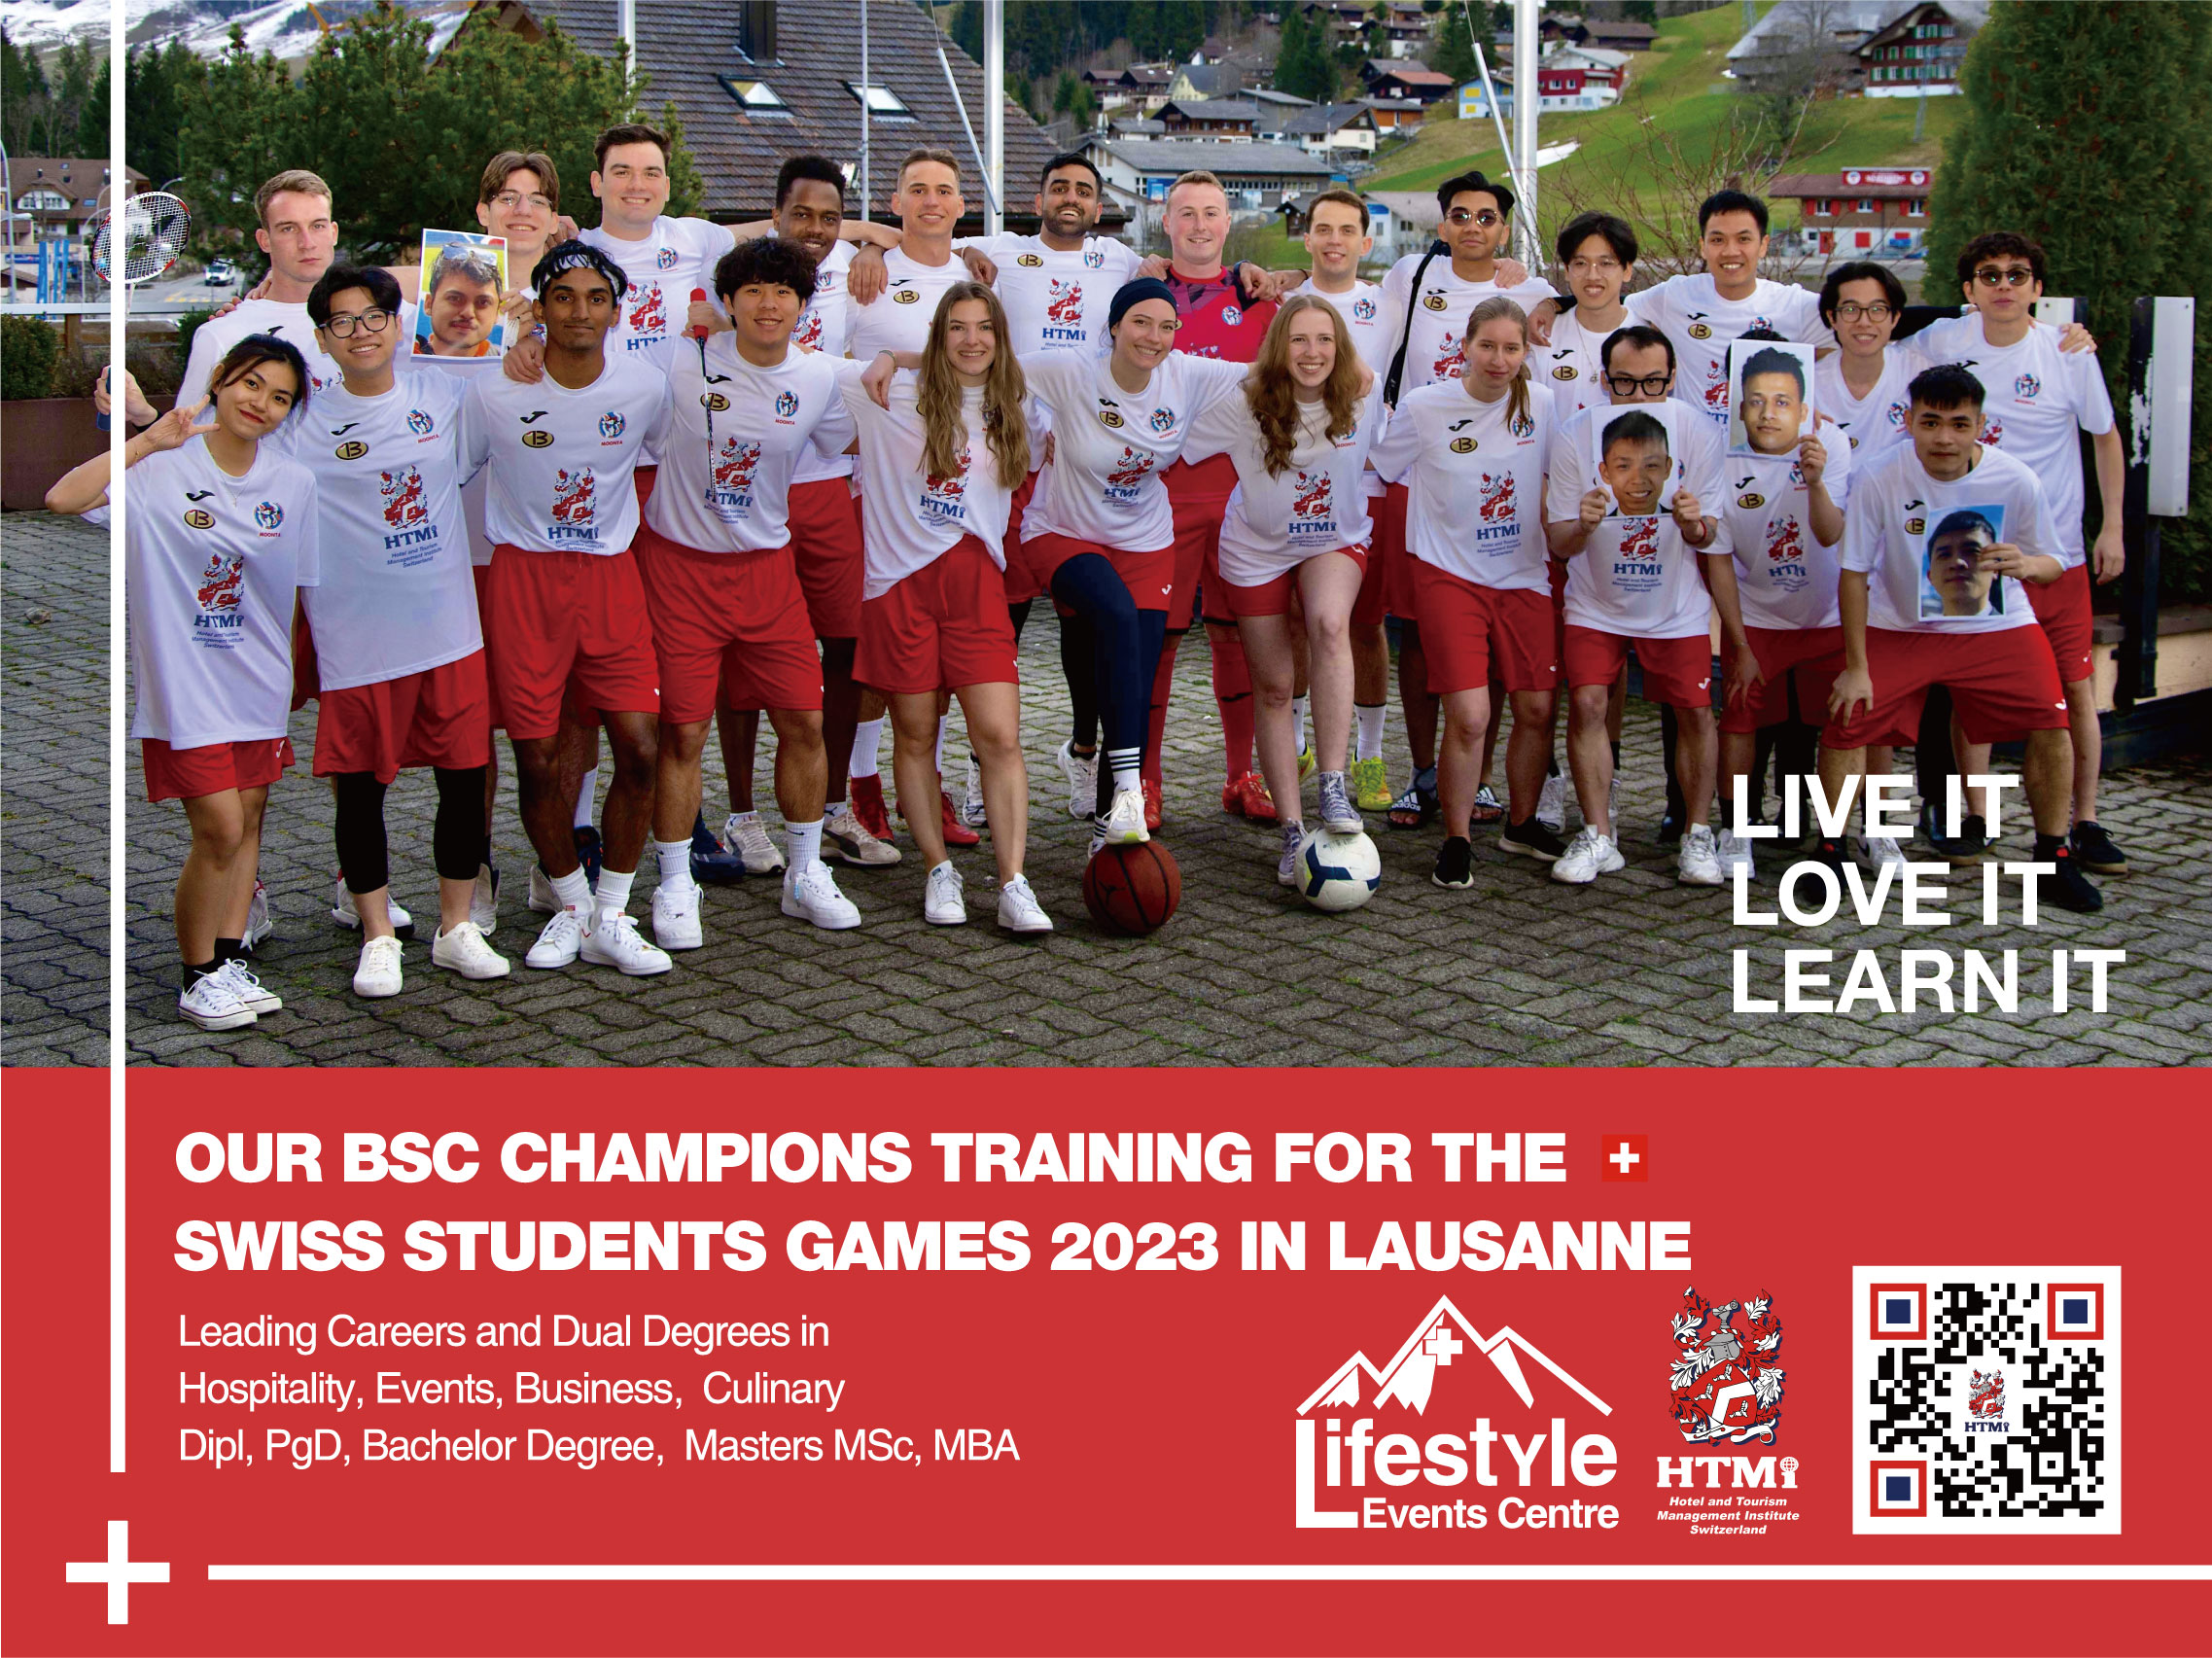 Our Bsc Champions Training For The + Swiss Students Games 2023 In Lausanne